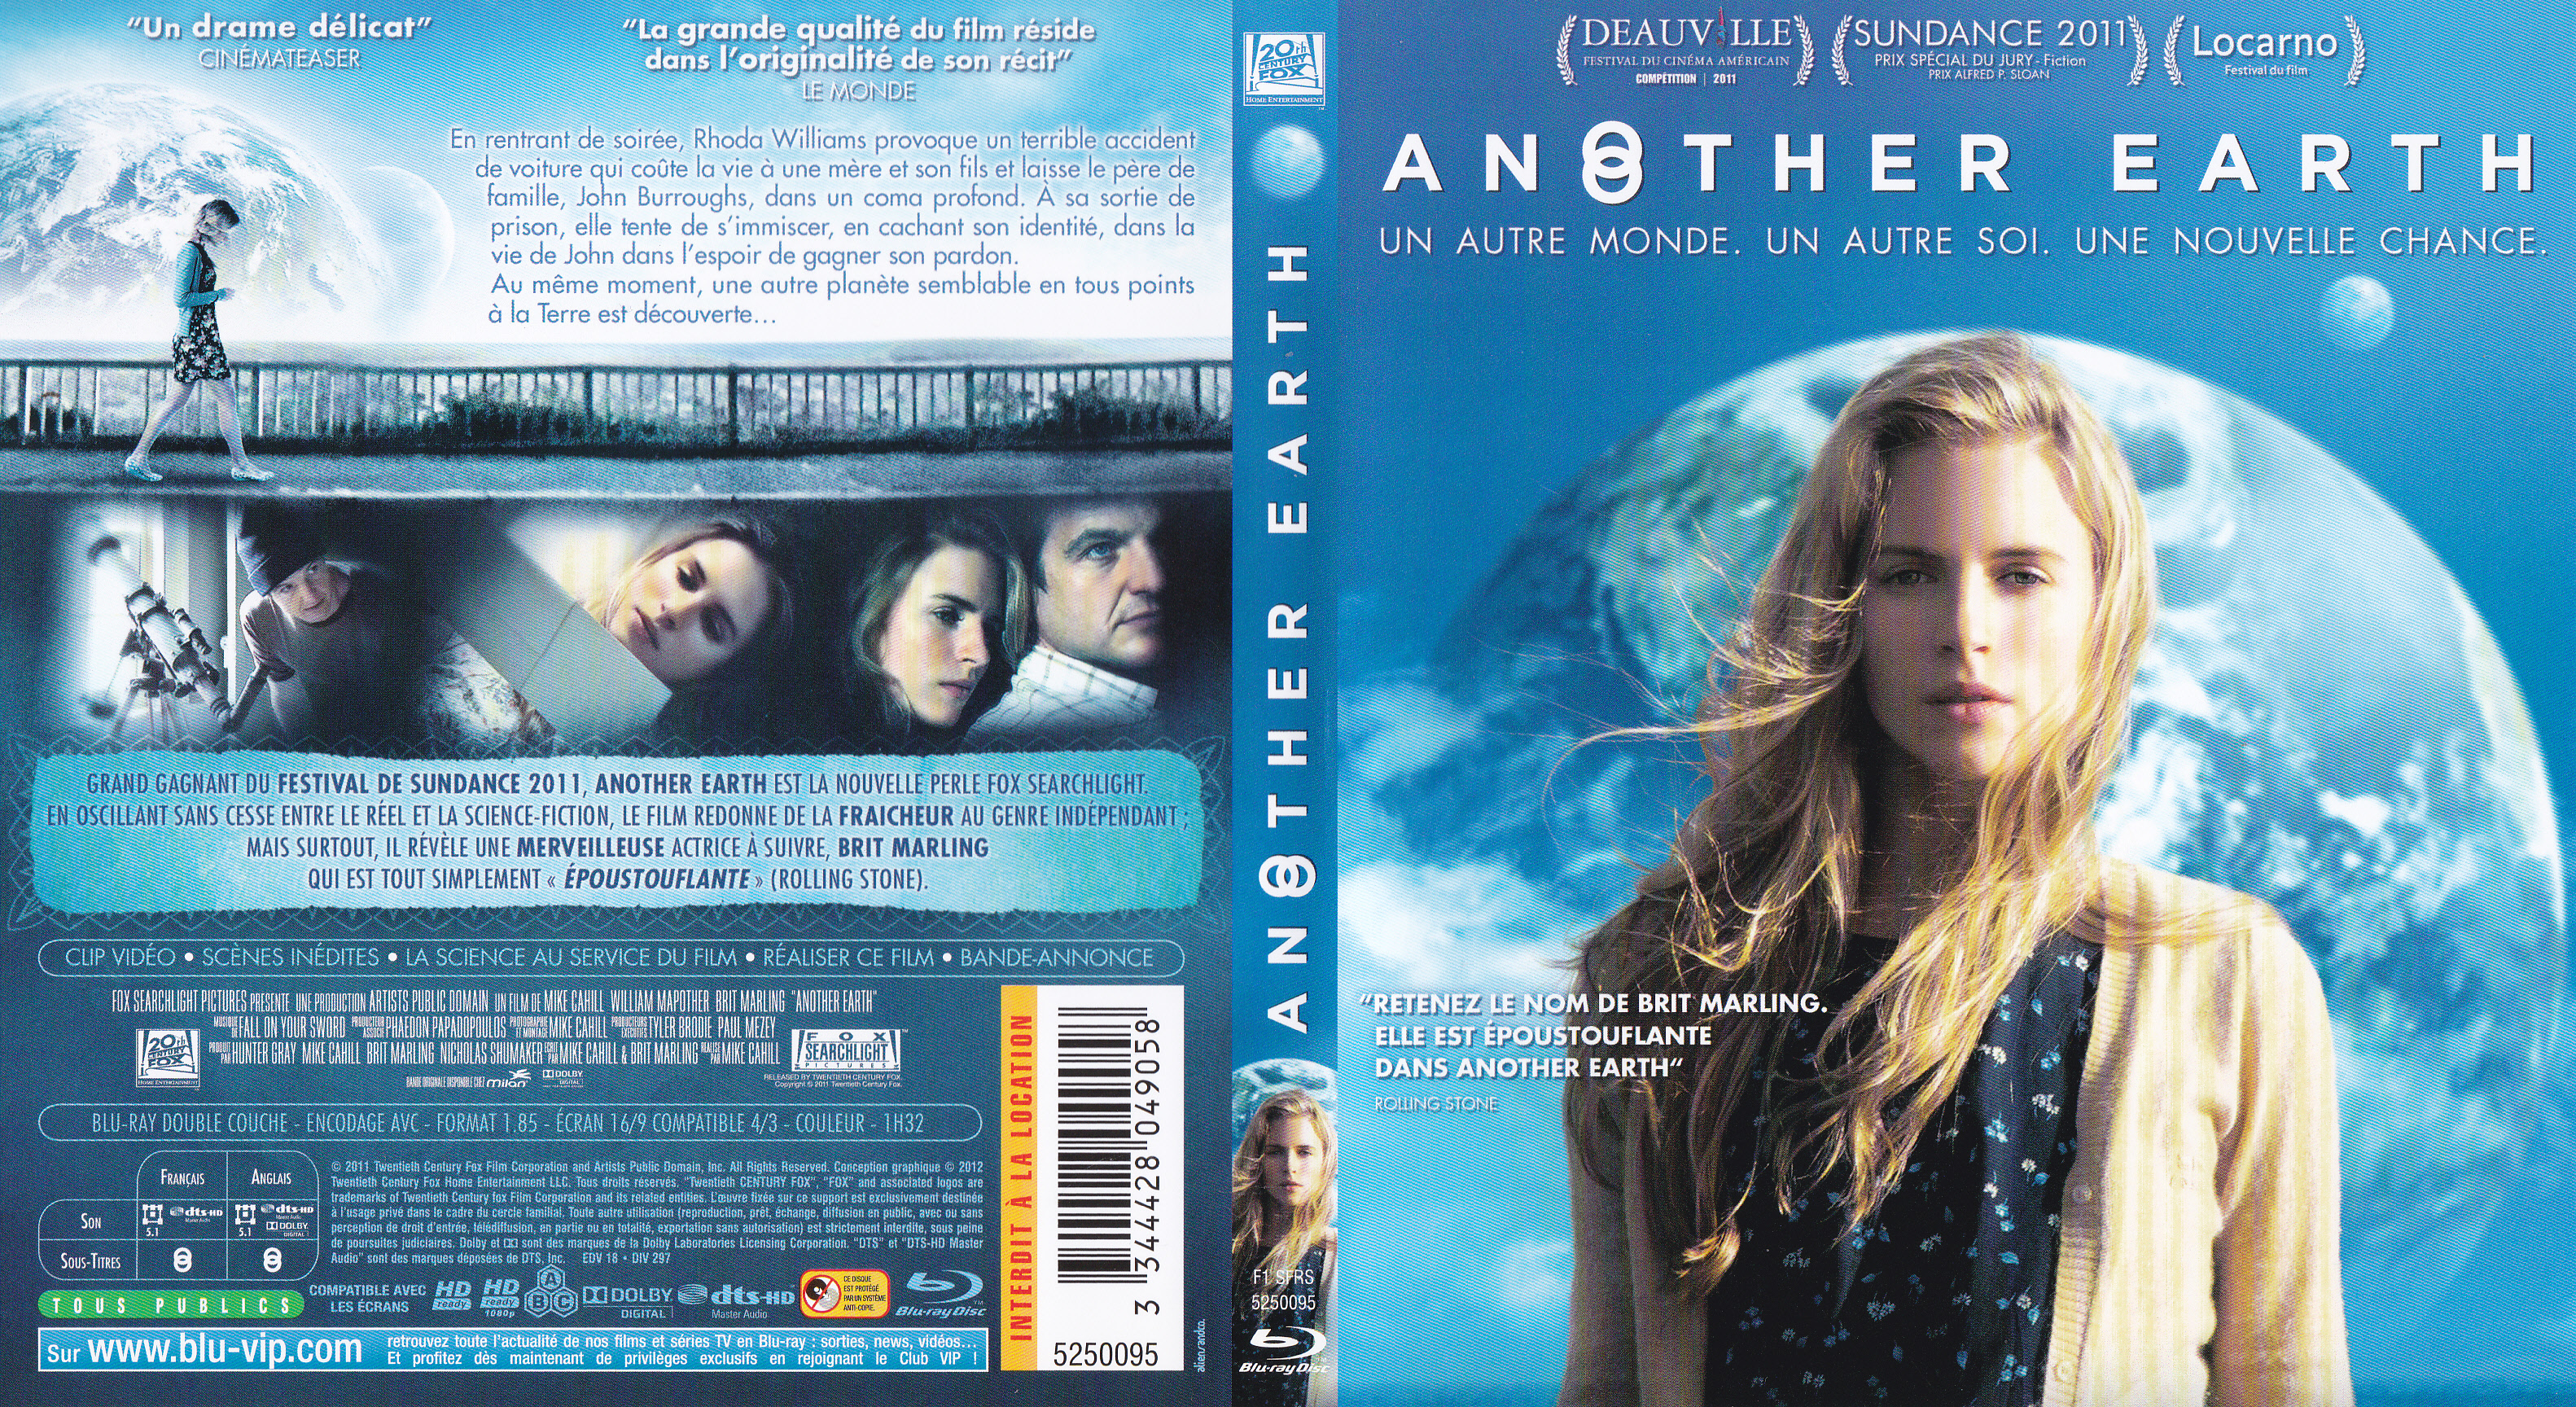 Jaquette DVD Another Earth (BLU-RAY)